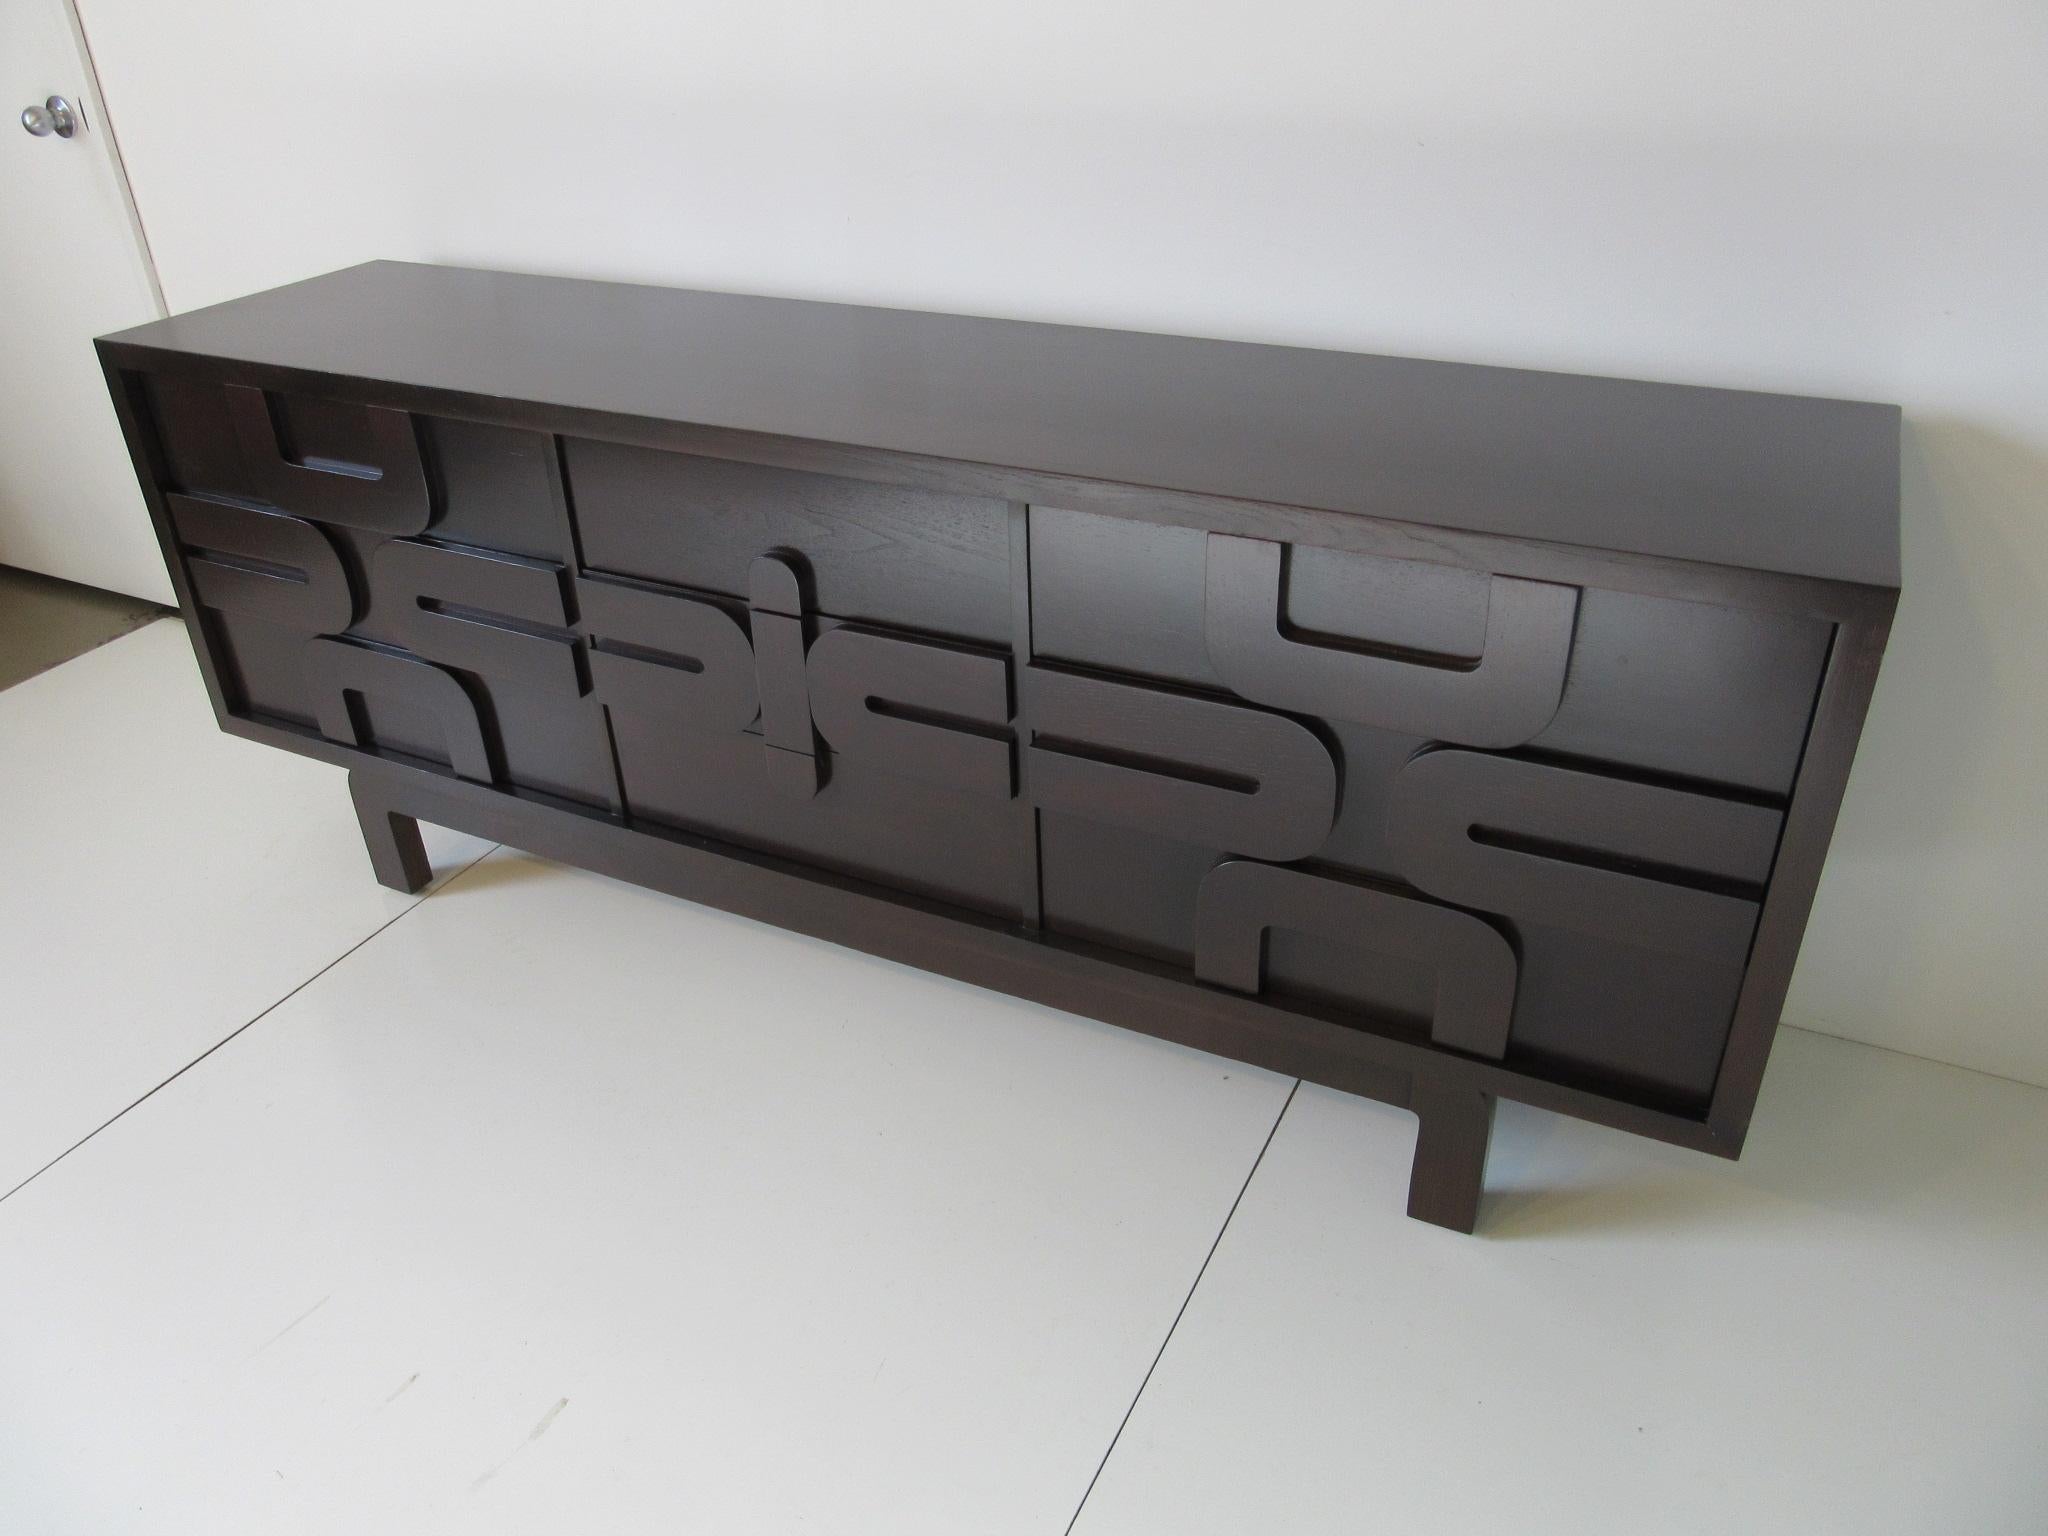 A ebony toned nine-drawer dresser chest with sculptural designed details to the front and curved legs that blend into the total look. This piece has a nice simple clean sophisticated feel with the it's rich finish and ample storage, manufactured by